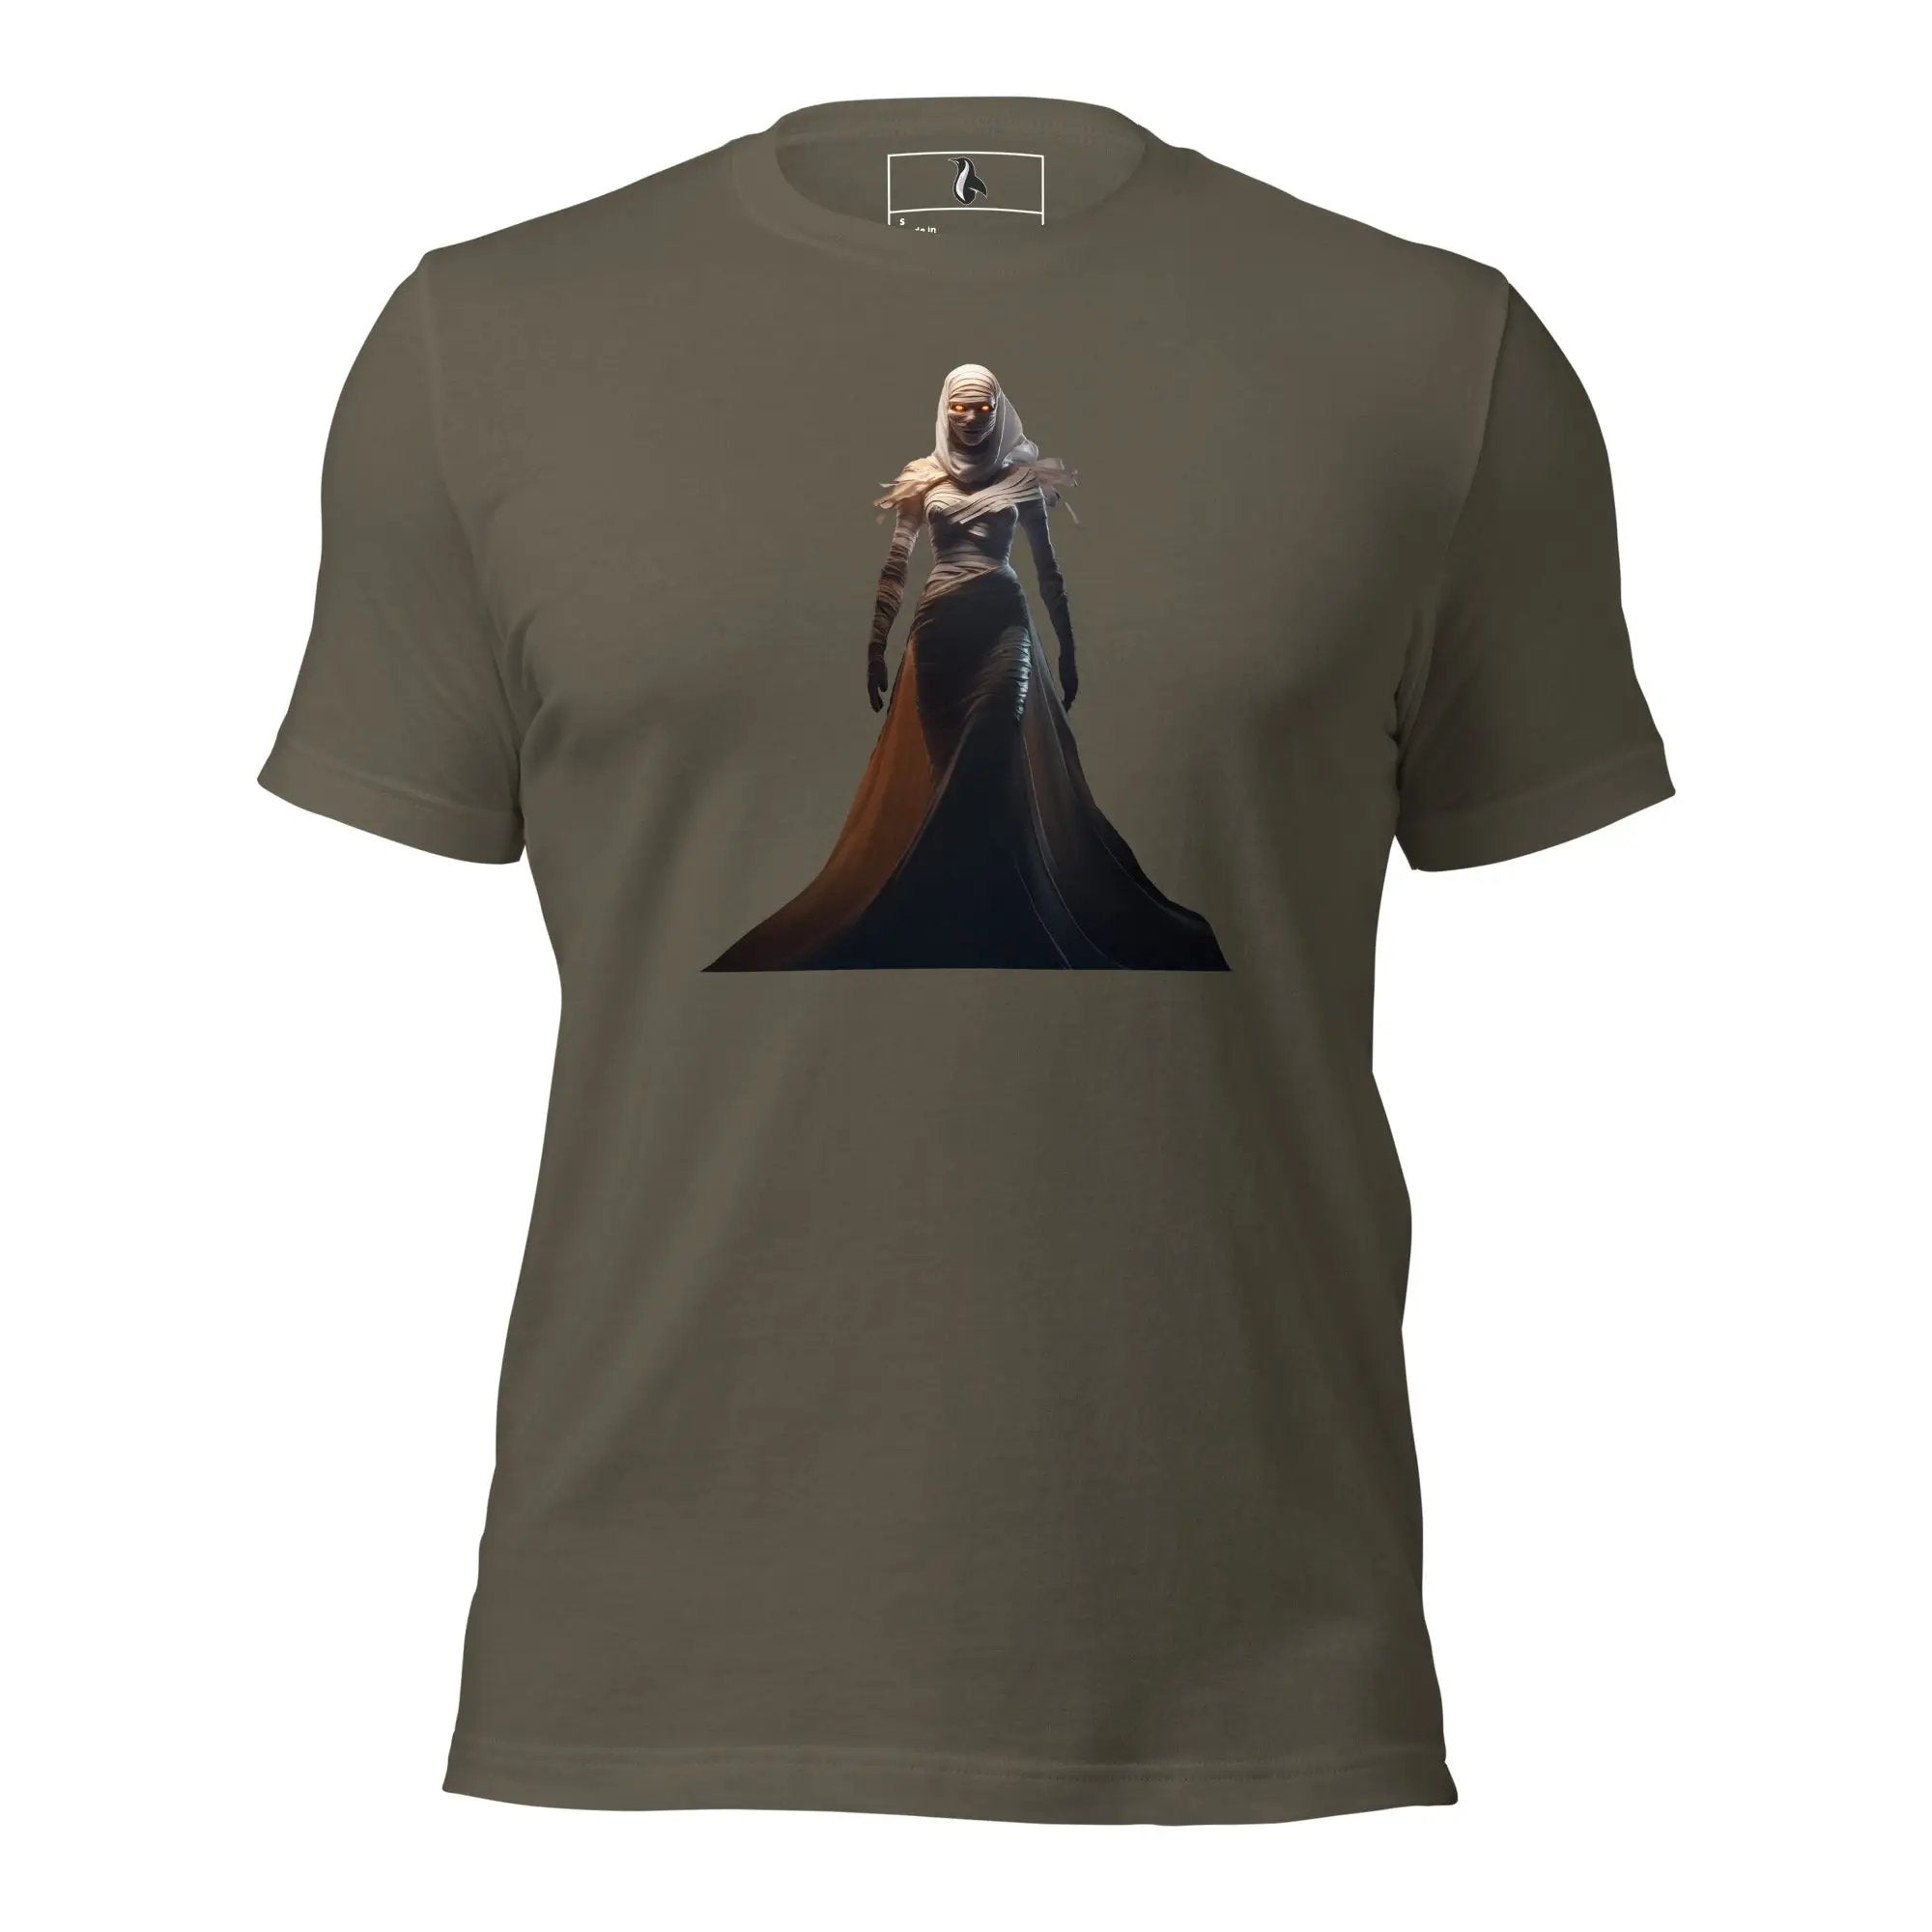 The Monster Squad "The Mummy" Unisex t-shirt